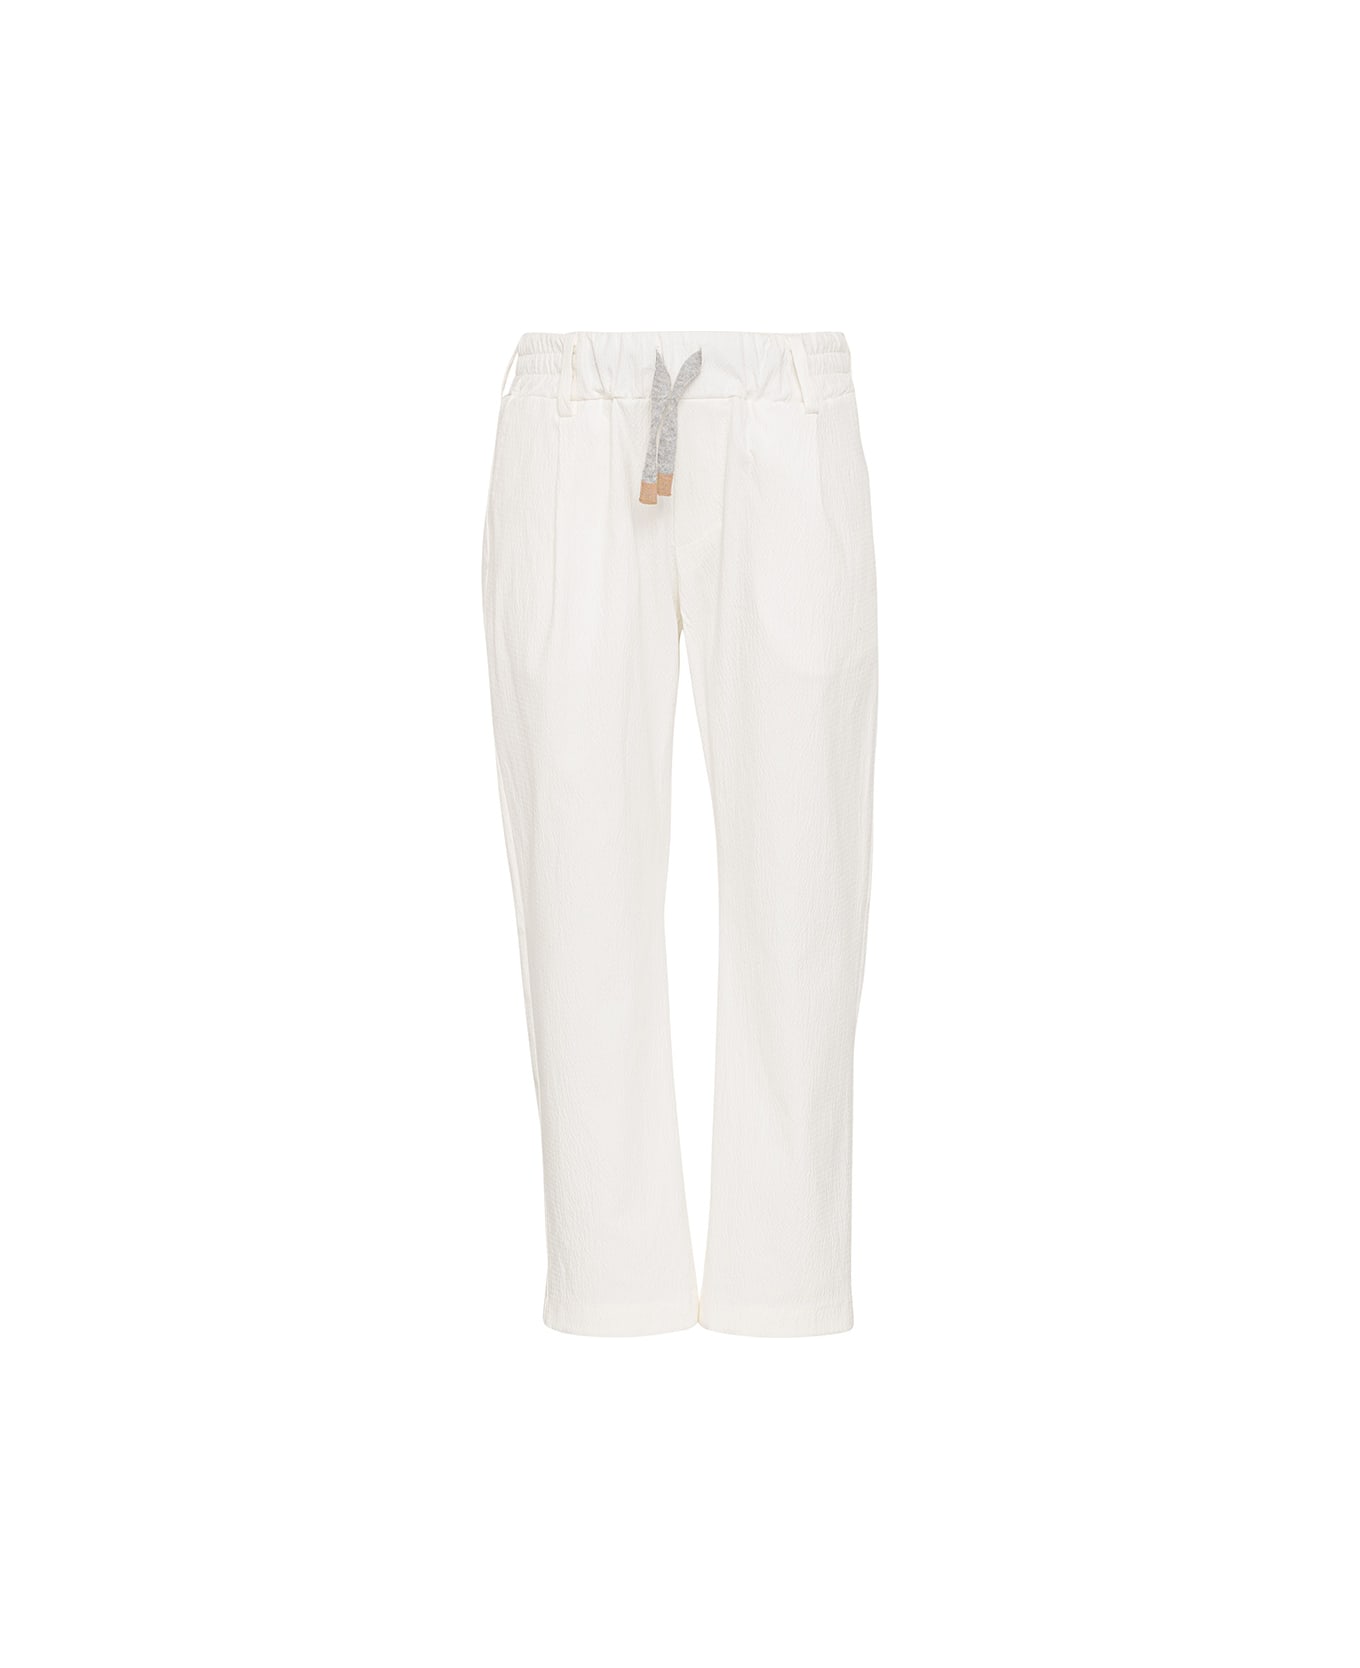 Eleventy White Joggers Pants With Contrasting Drawstring - White